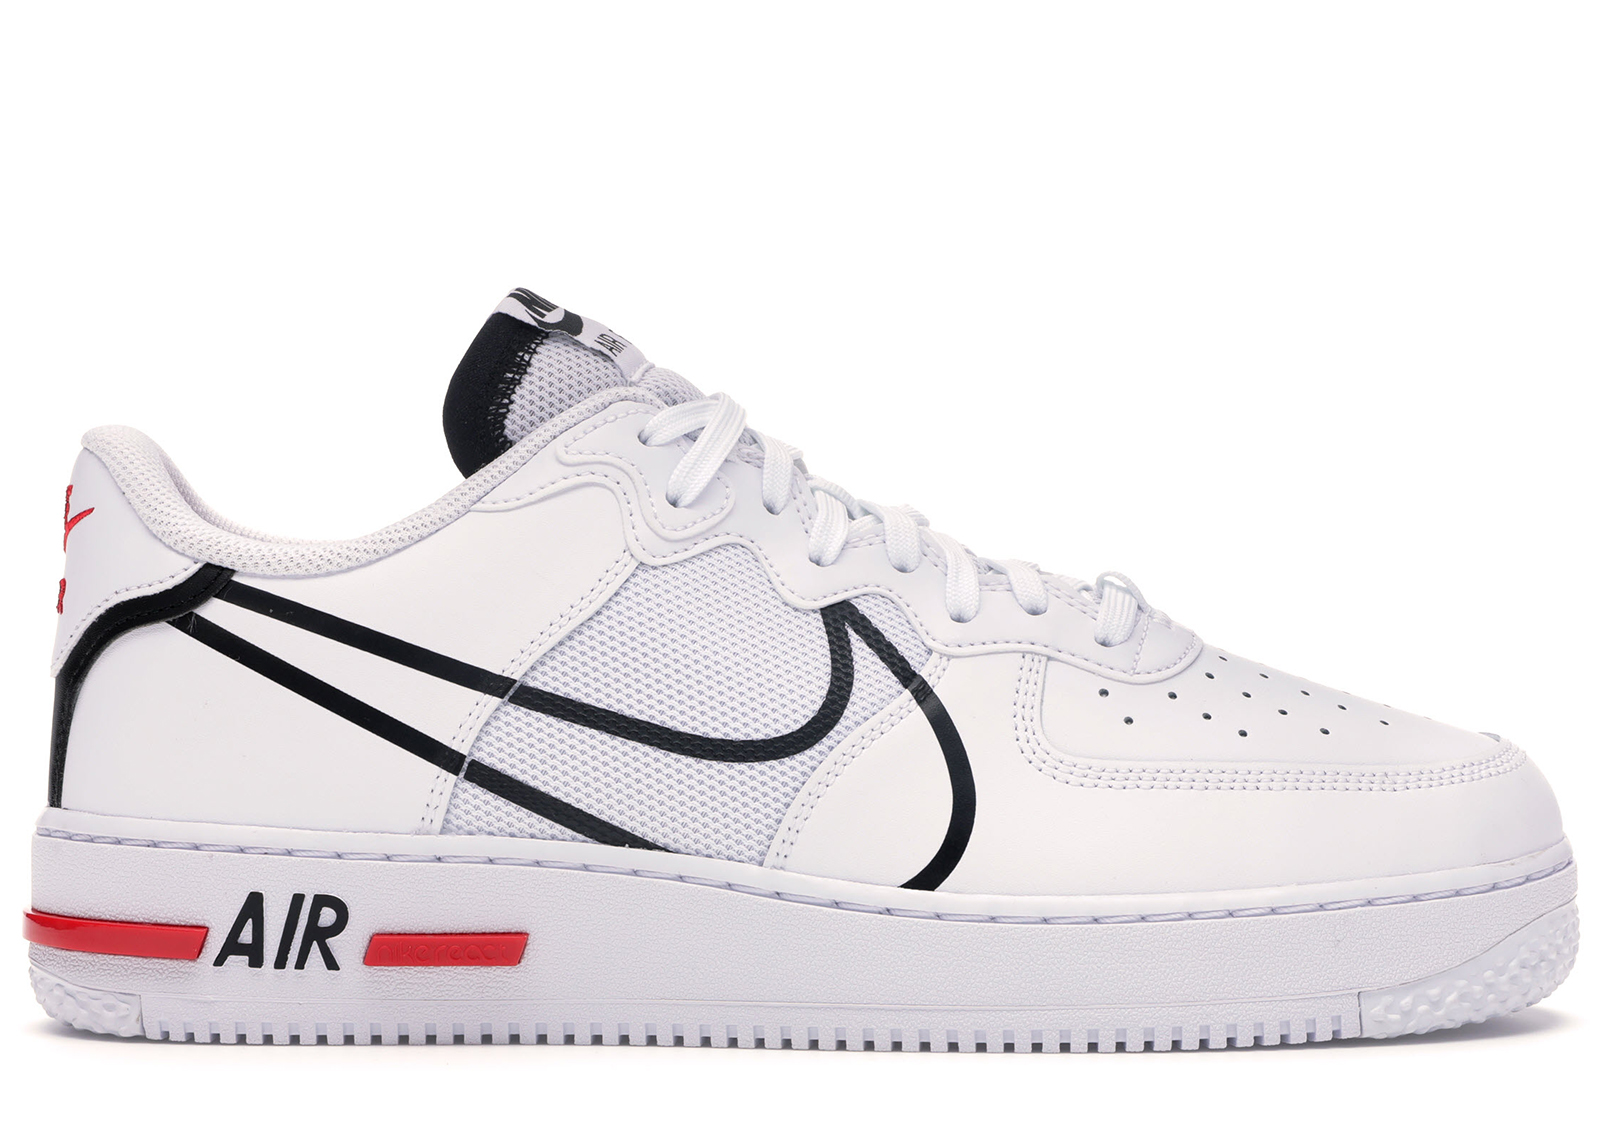 Nike Air Force 1 React White Black Red سكووب